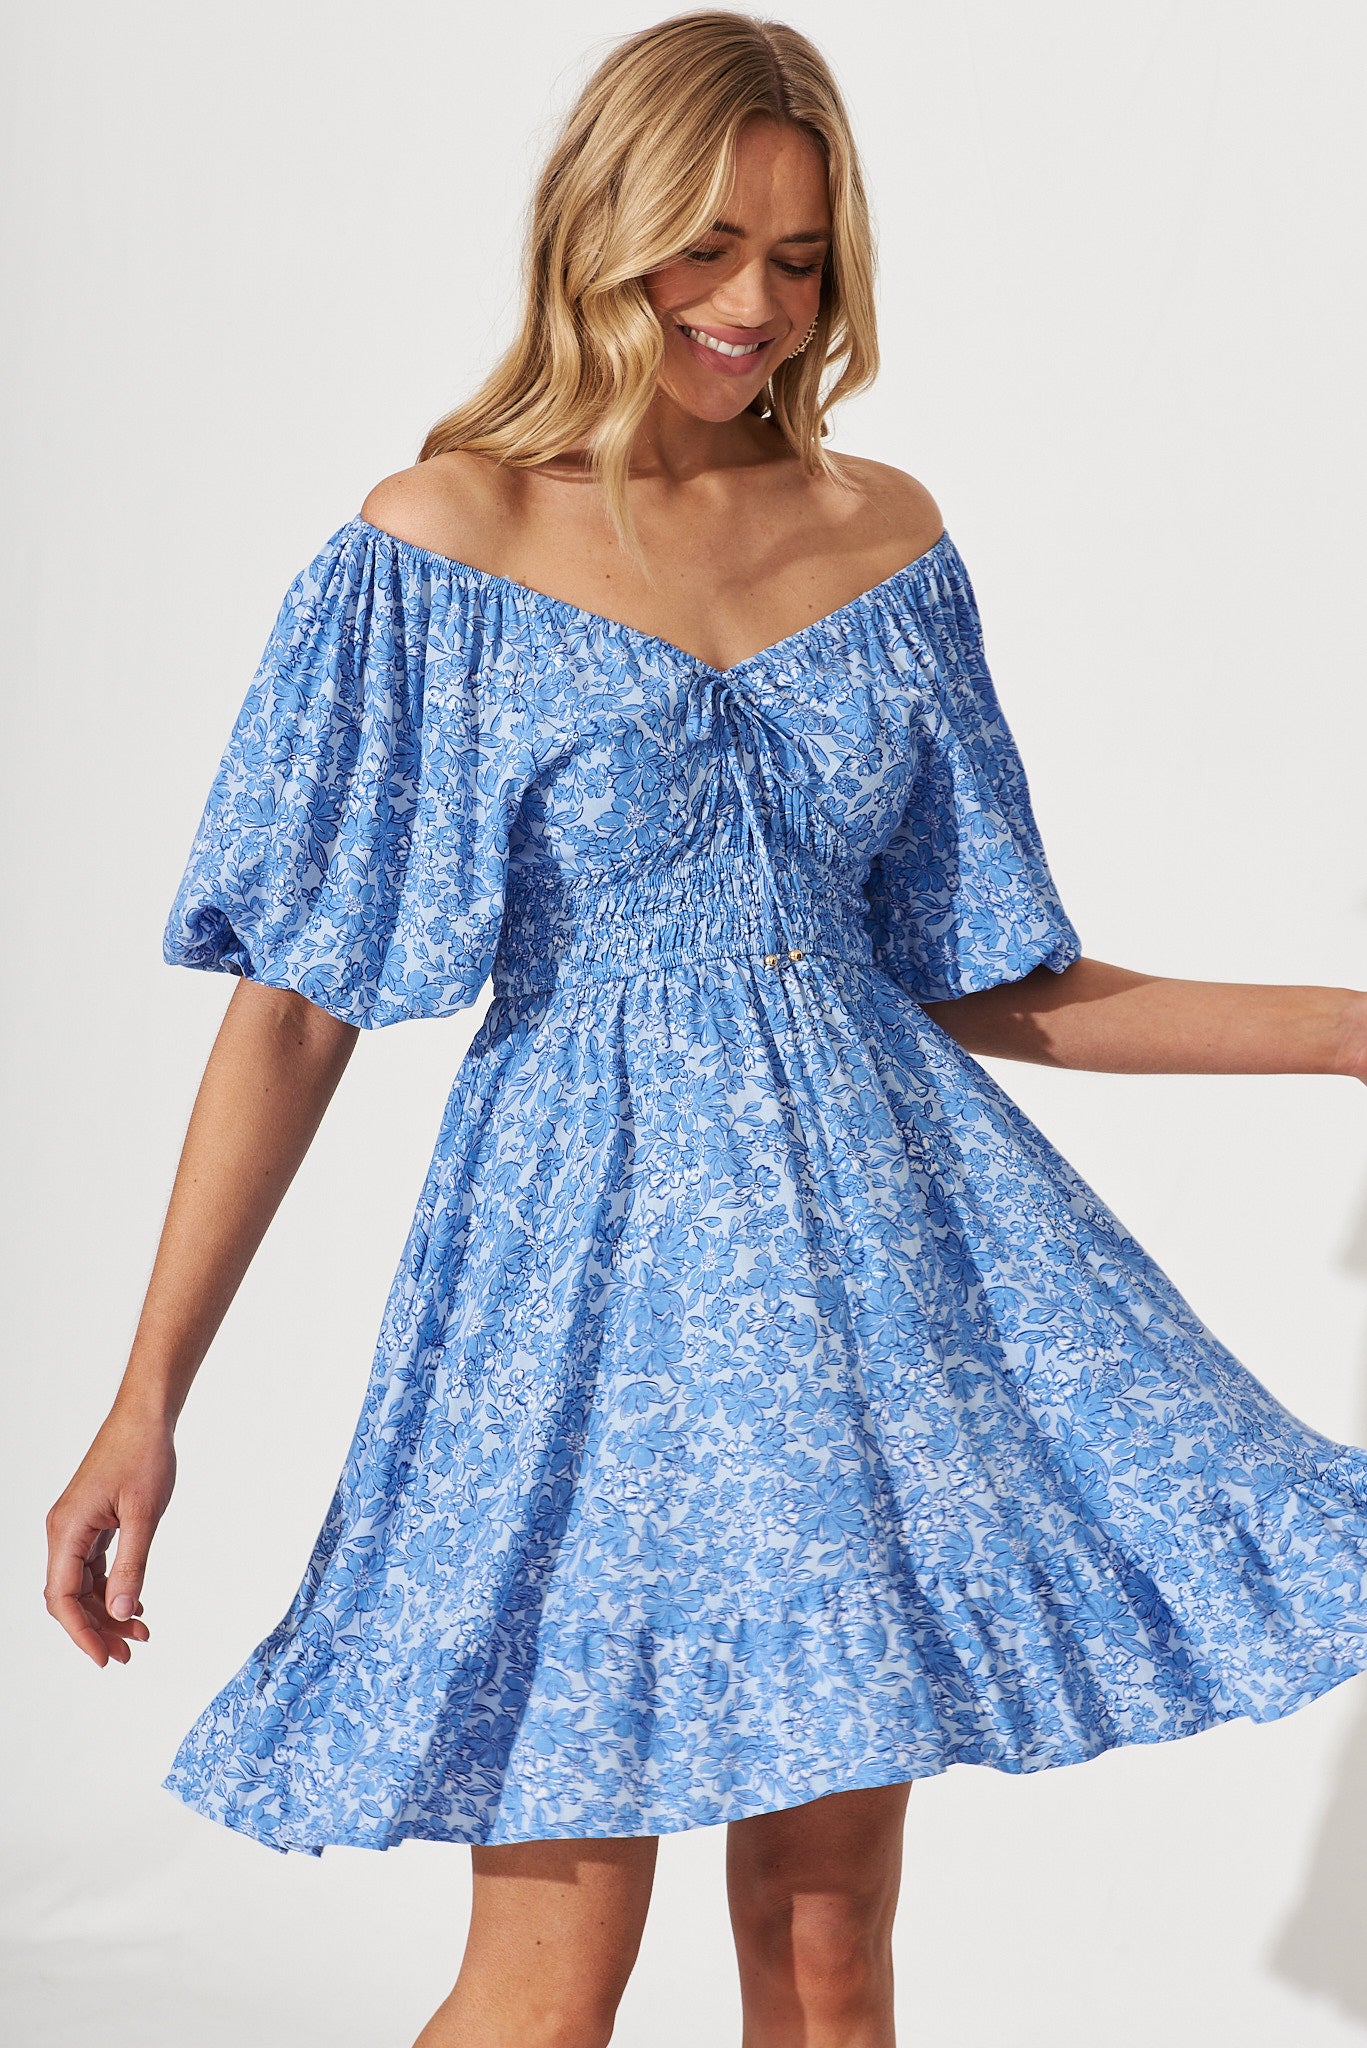 Oklahoma Dress In Blue With White Print - front